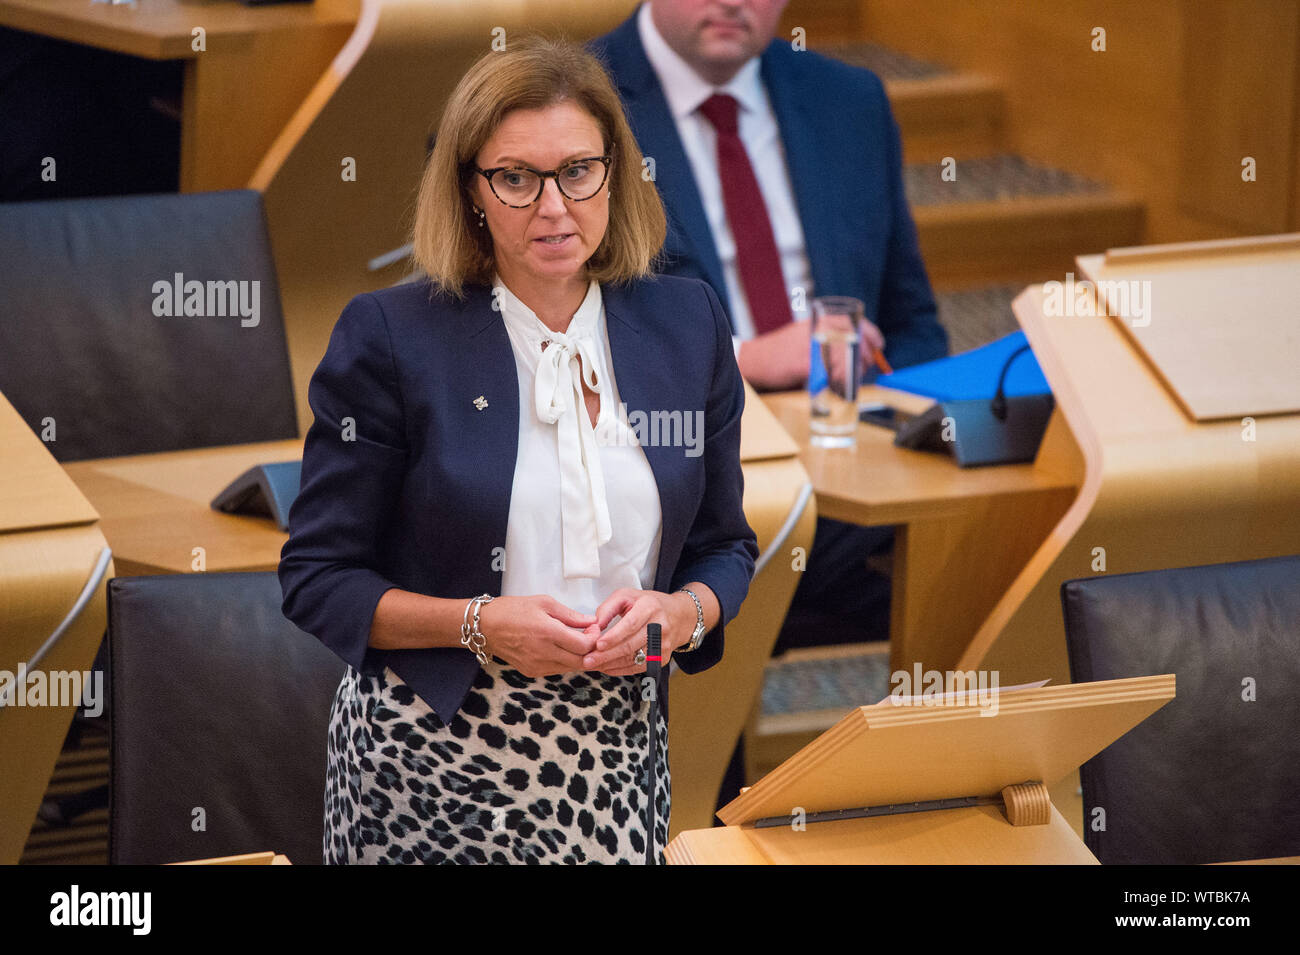 Edinburgh, UK. 5 September 2019. Pictured: Rachael Hamilton MSP - Shadow Culture & Tourism. Scottish Government Debate: Avoiding A No Deal Exit From The EU.  That the Parliament agrees that the UK should in no circumstances leave the EU on a no-deal basis, and condemns the Prime Minister’s suspension of the UK Parliament from as early as 9 September until 14 October 2019. The result of the division is: For 87, Against 28, Abstentions 0. Colin Fisher/CDFIMAGES.COM Stock Photo